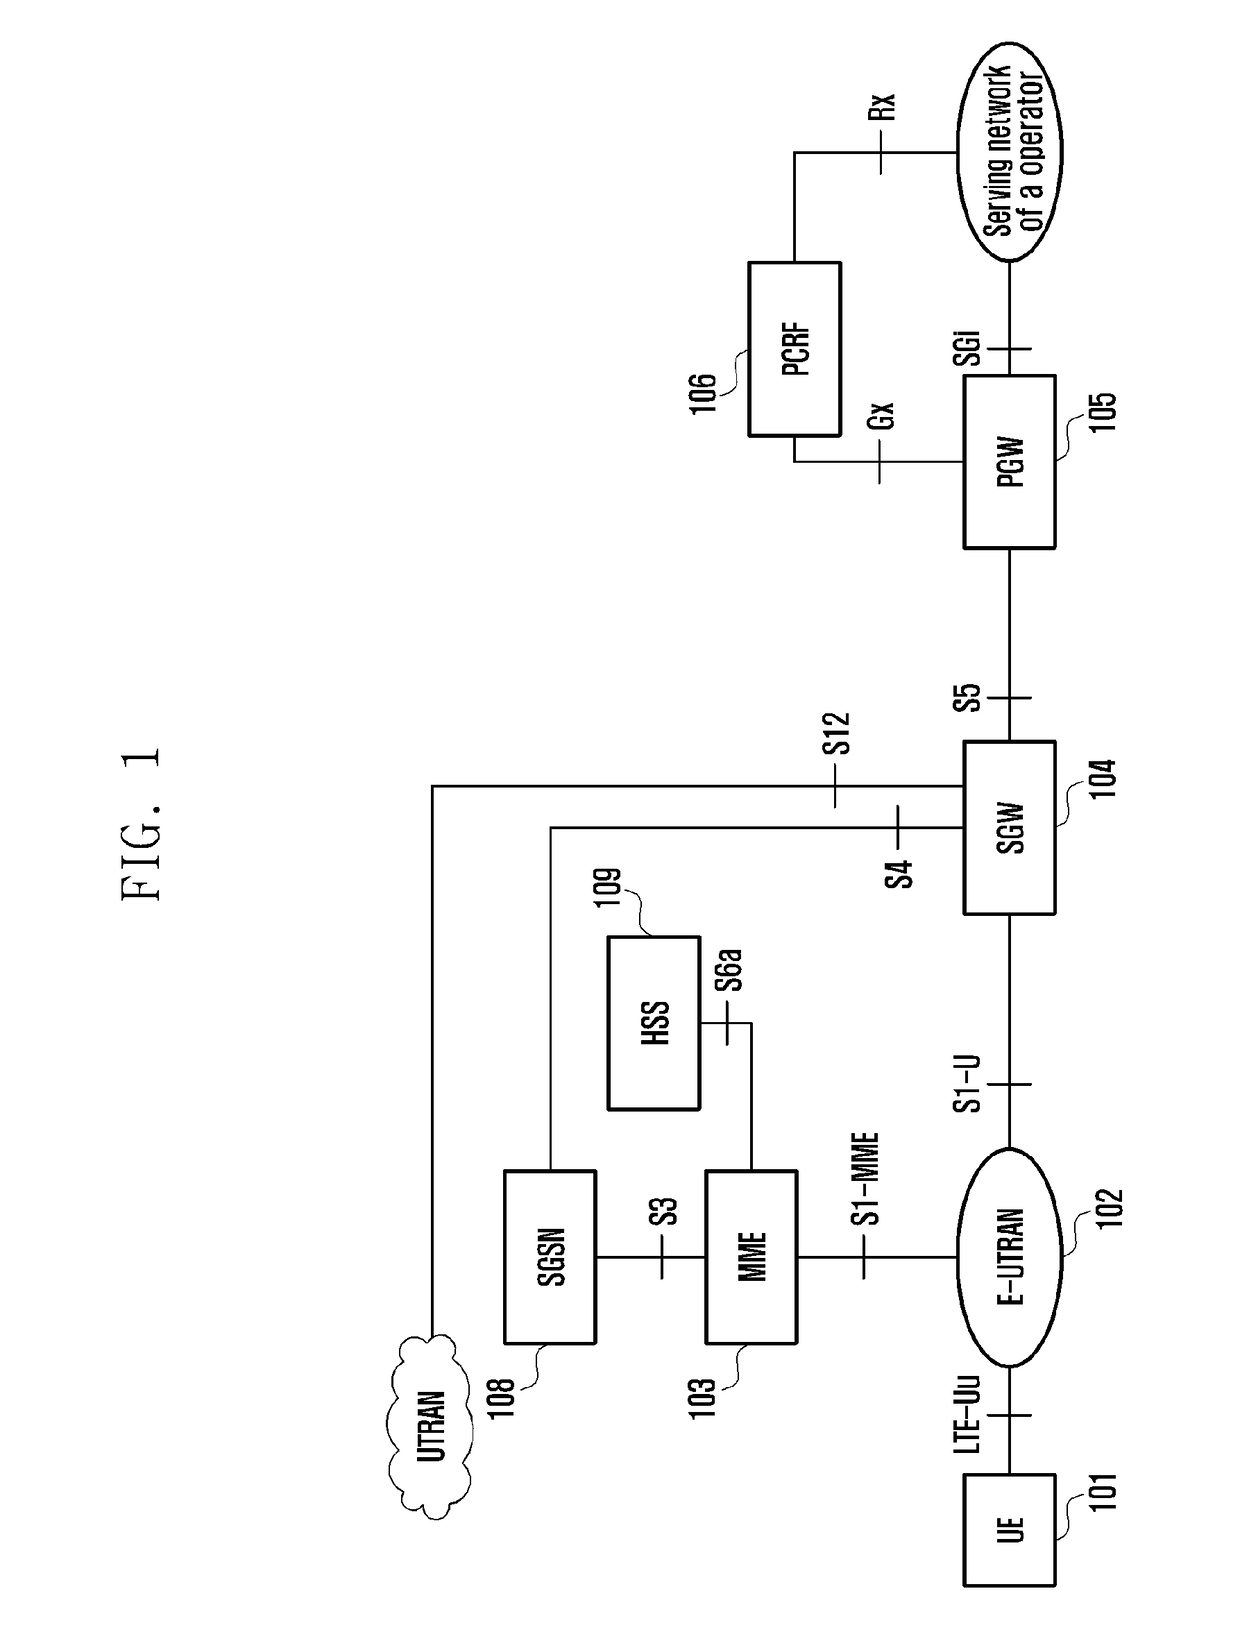 Method, system, and apparatus for transmitting group communication service data